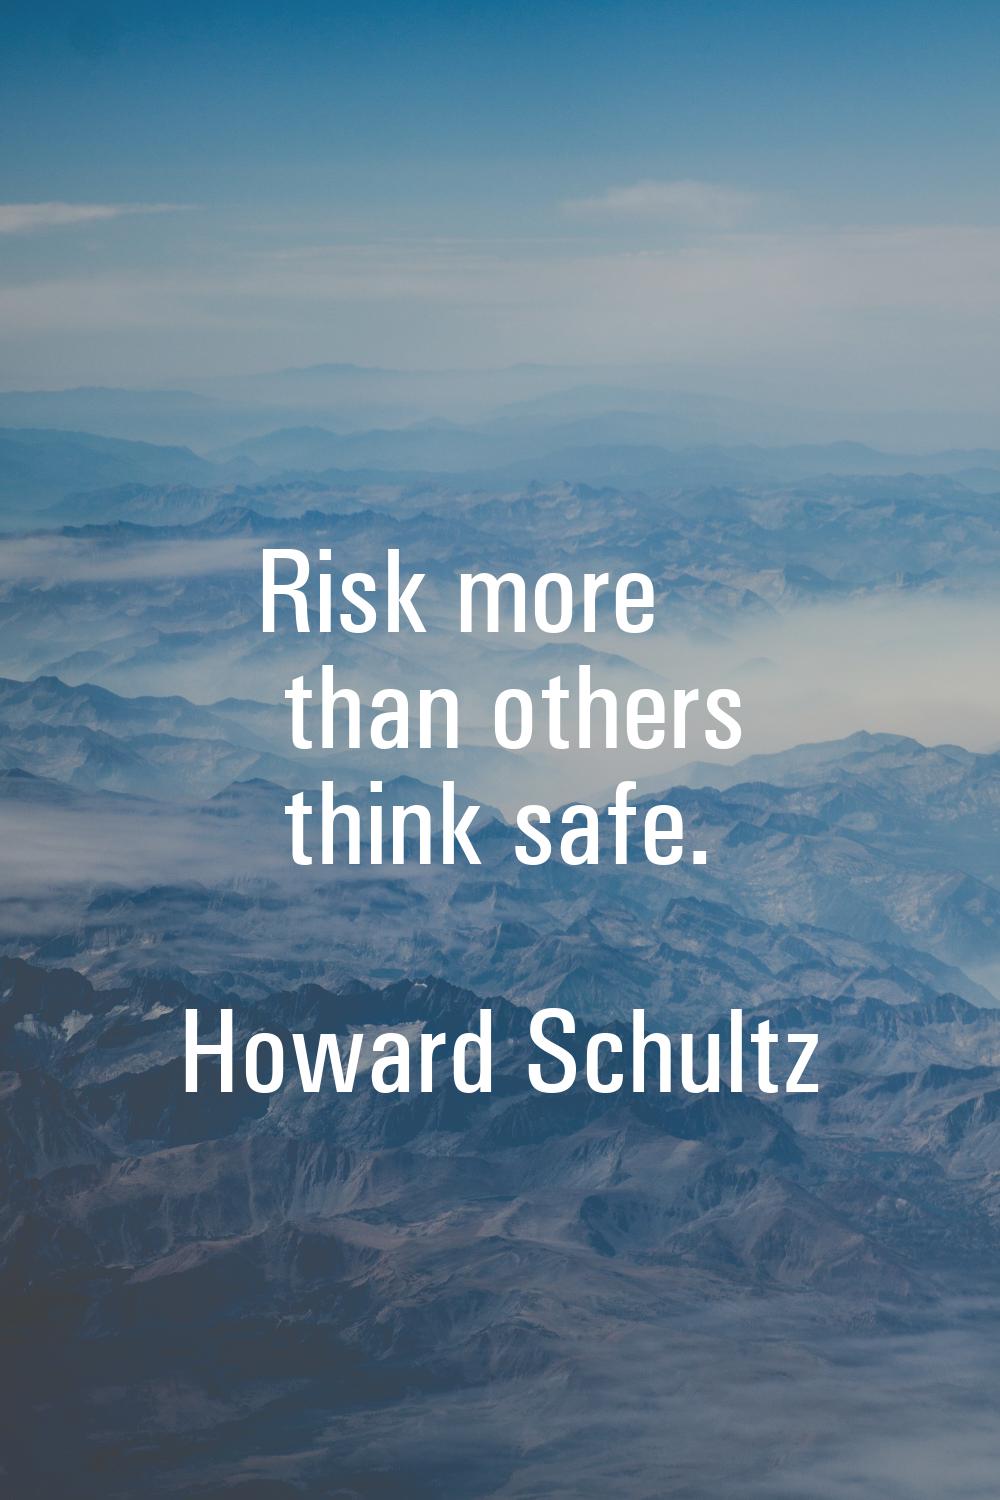 Risk more than others think safe.